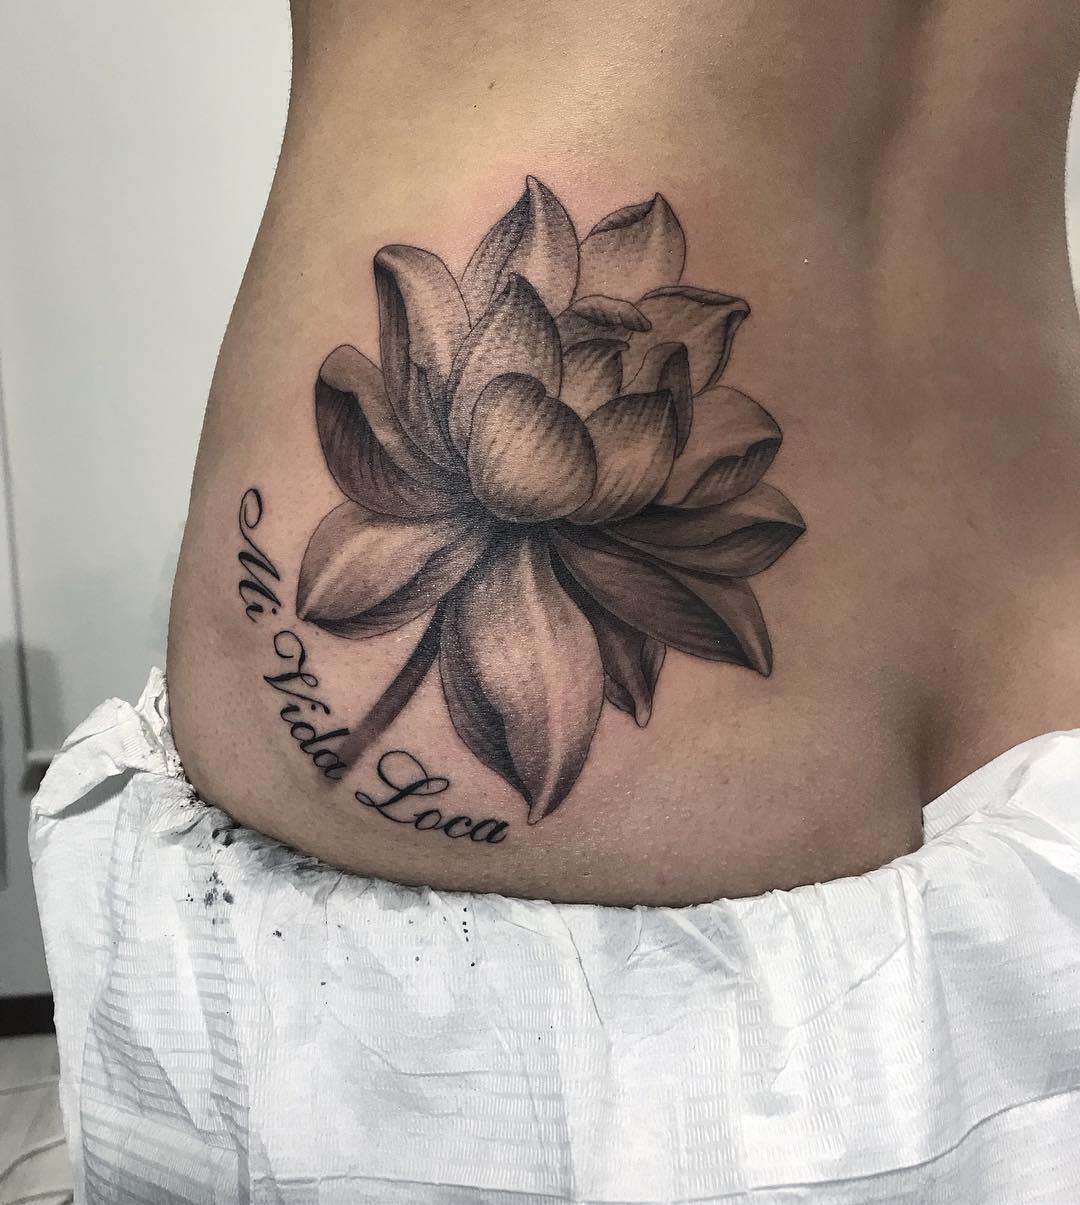 Lily Flower Tattoos: Meanings, Pictures, Designs, and Ideas - TatRing